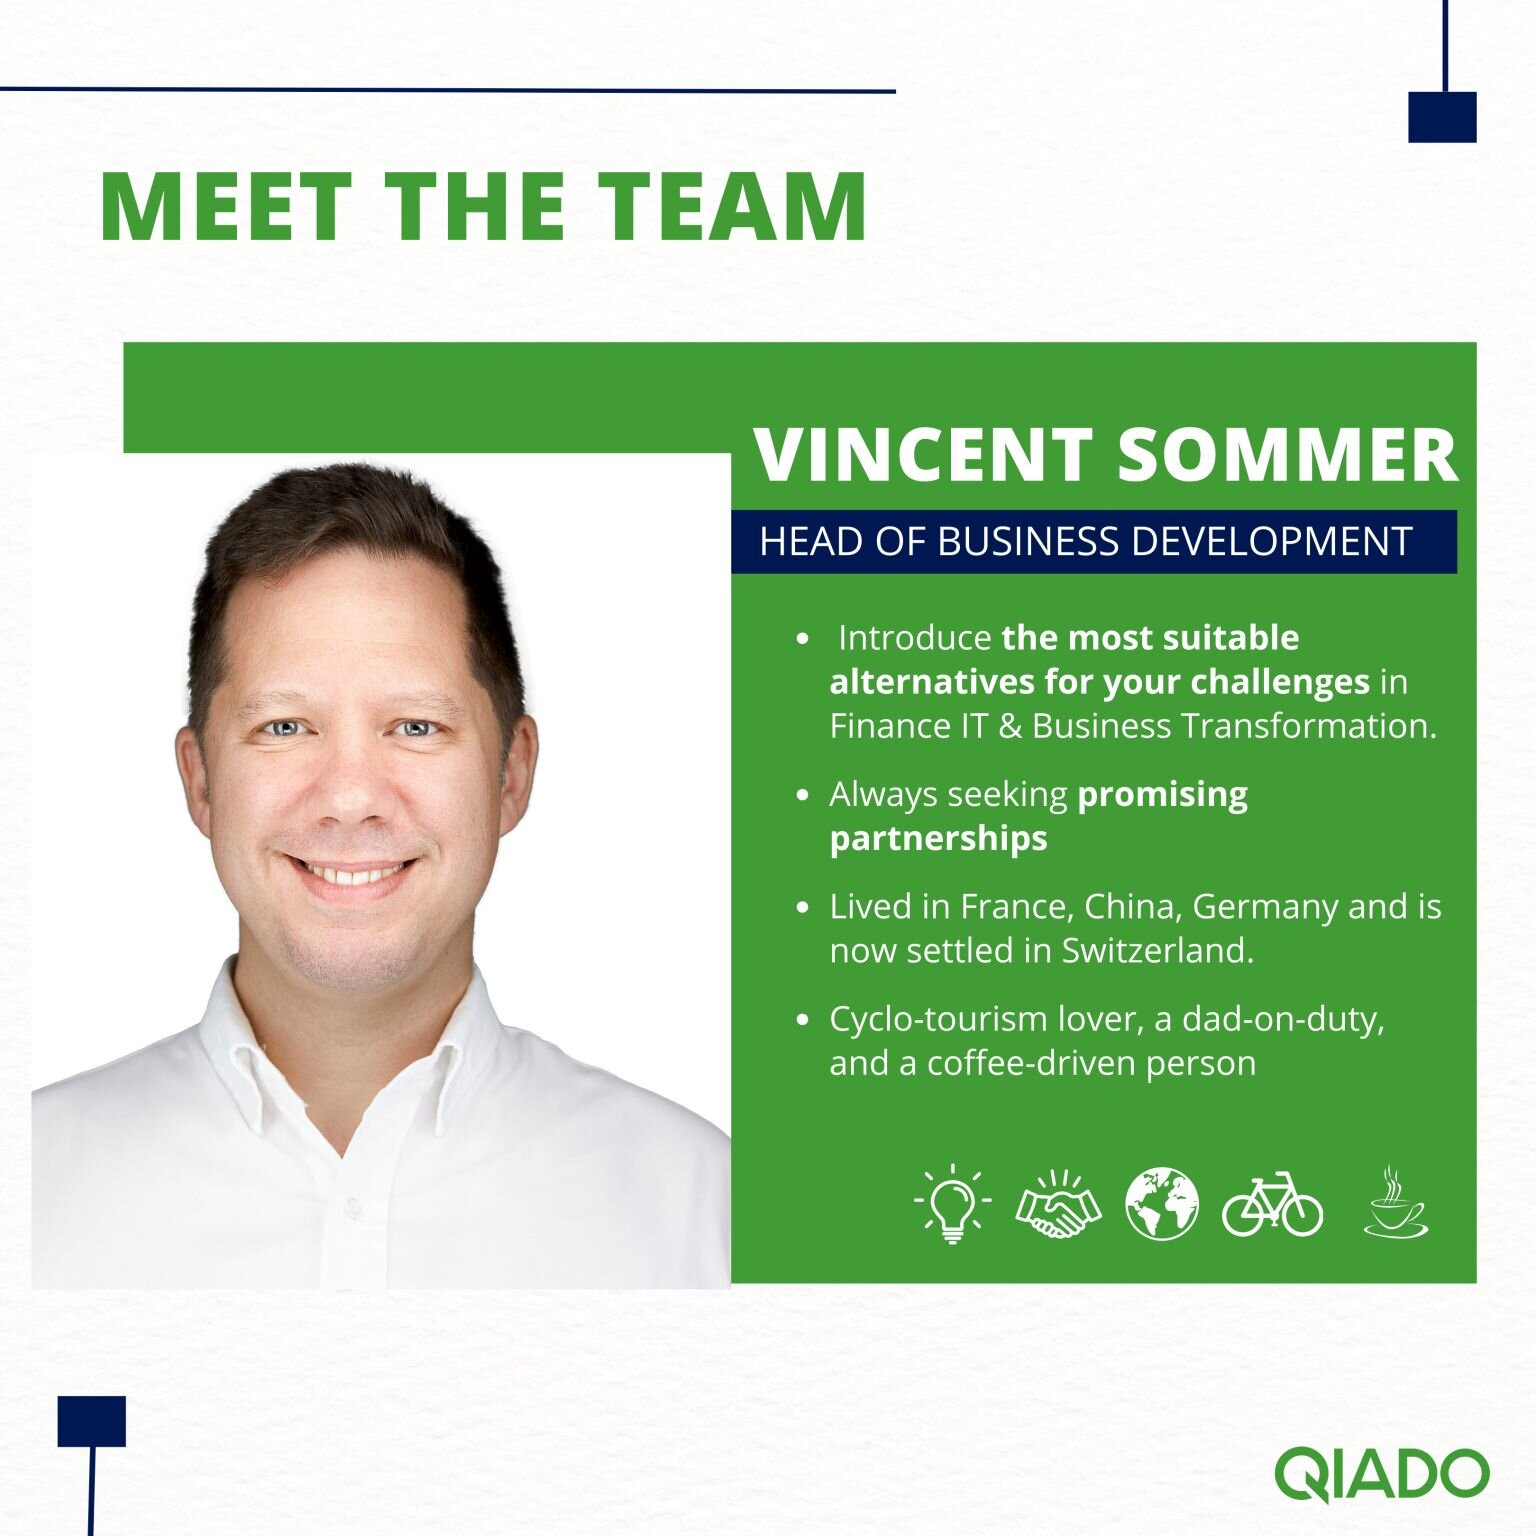 Looking to empower Finance IT in your business? 🚀 It&acute;s time to meet Vincent Sommer D'Yvoire, our Head of Business Development! 💡 He&acute;s the right person to introduce you to the most suitable alternatives for your challenges in Contract Le